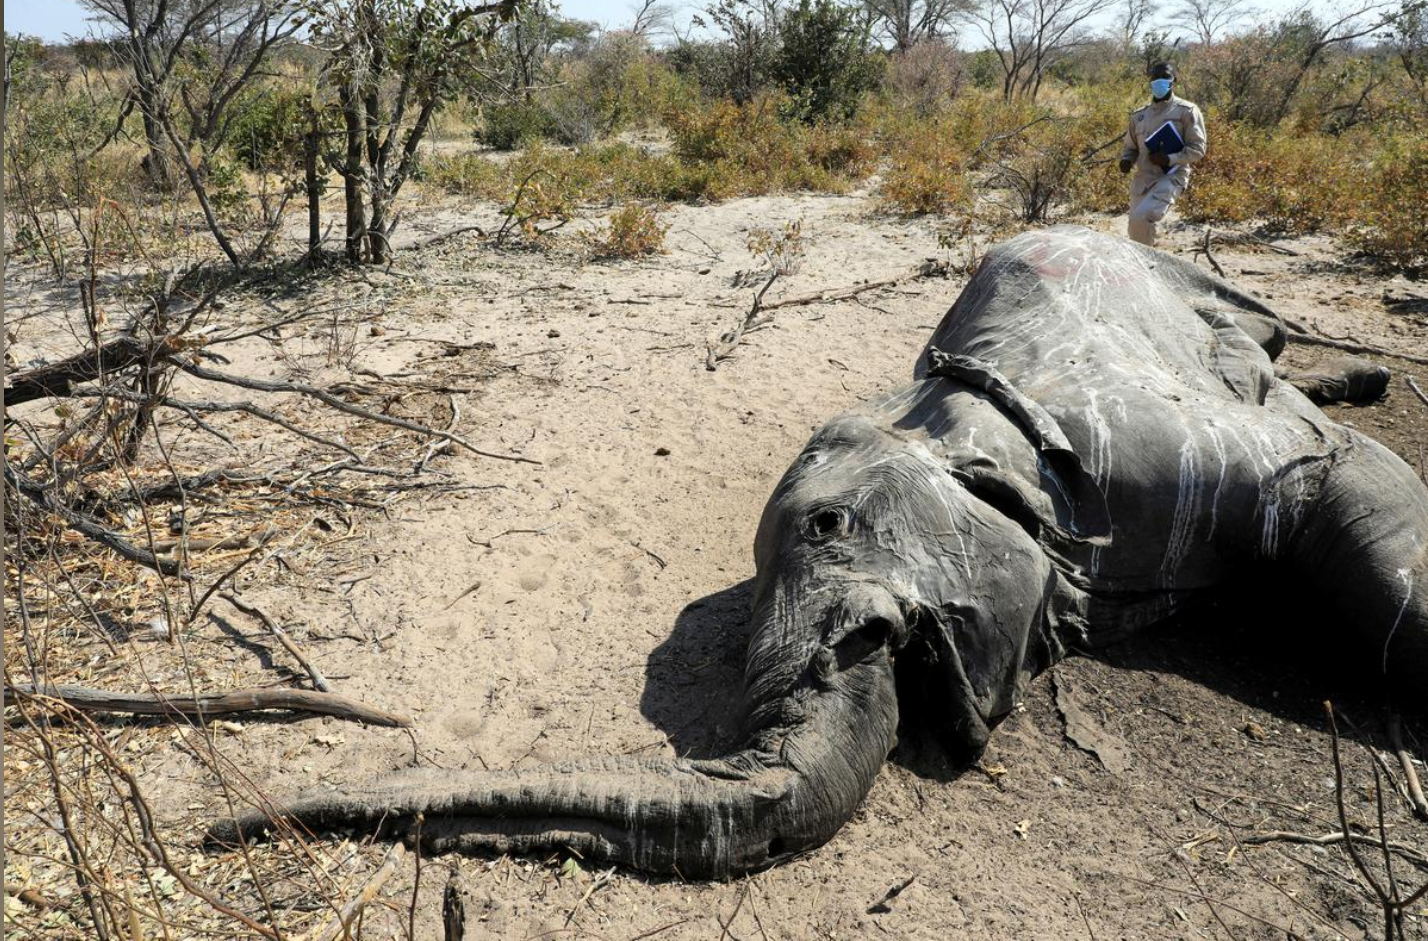 botswana receives first test results on elephant deaths